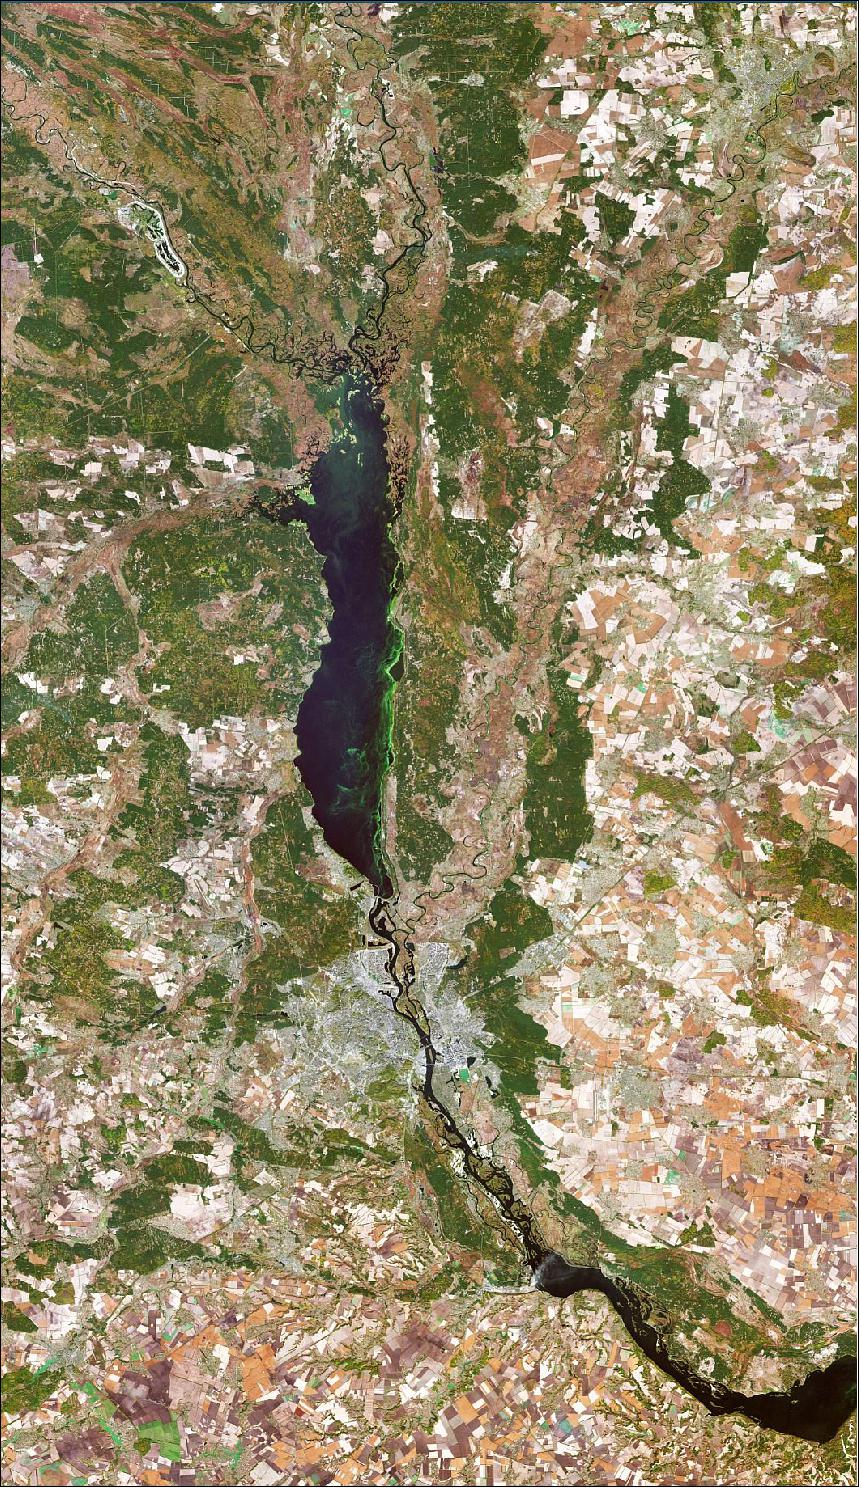 Figure 1: Originally just on the west bank, today the city of Kyiv spreads across both sides of the Dnieper River, which flows southwards through the city. The Dnieper is the fourth-longest river in Europe, after the Volga, Danube and Ural rivers. It rises on the southern slopes of the Valdai Hills of Russia and flows in a southerly direction through western Russia, Belarus and Ukraine to the Black Sea. This image is also featured on the Earth from Space video program (image credit: ESA, the image contains modified Copernicus Sentinel data (2019), processed by ESA)